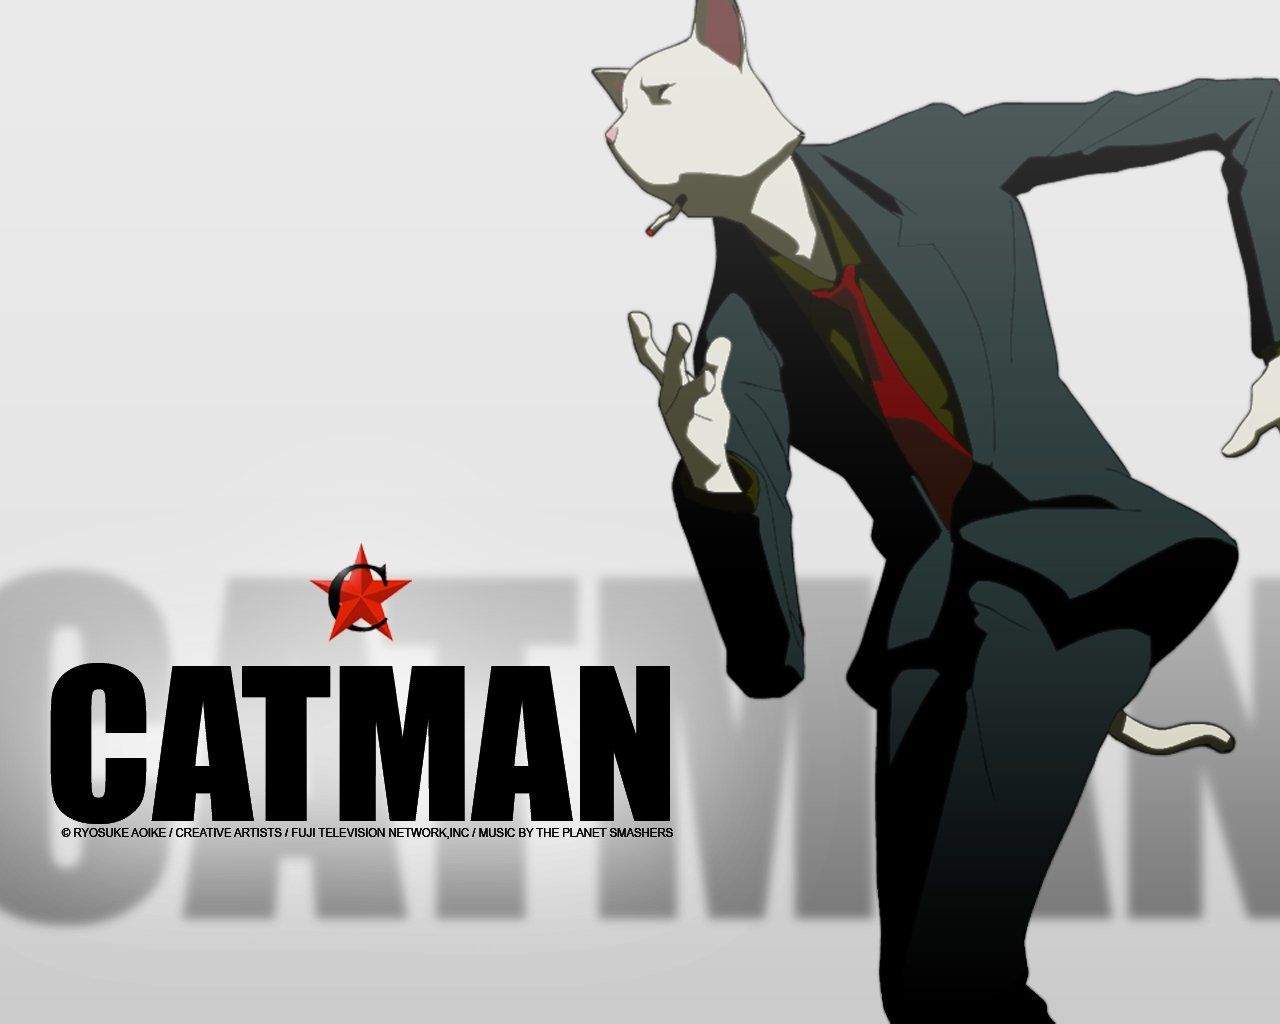 Catman Wallpaper and Background Imagex1024